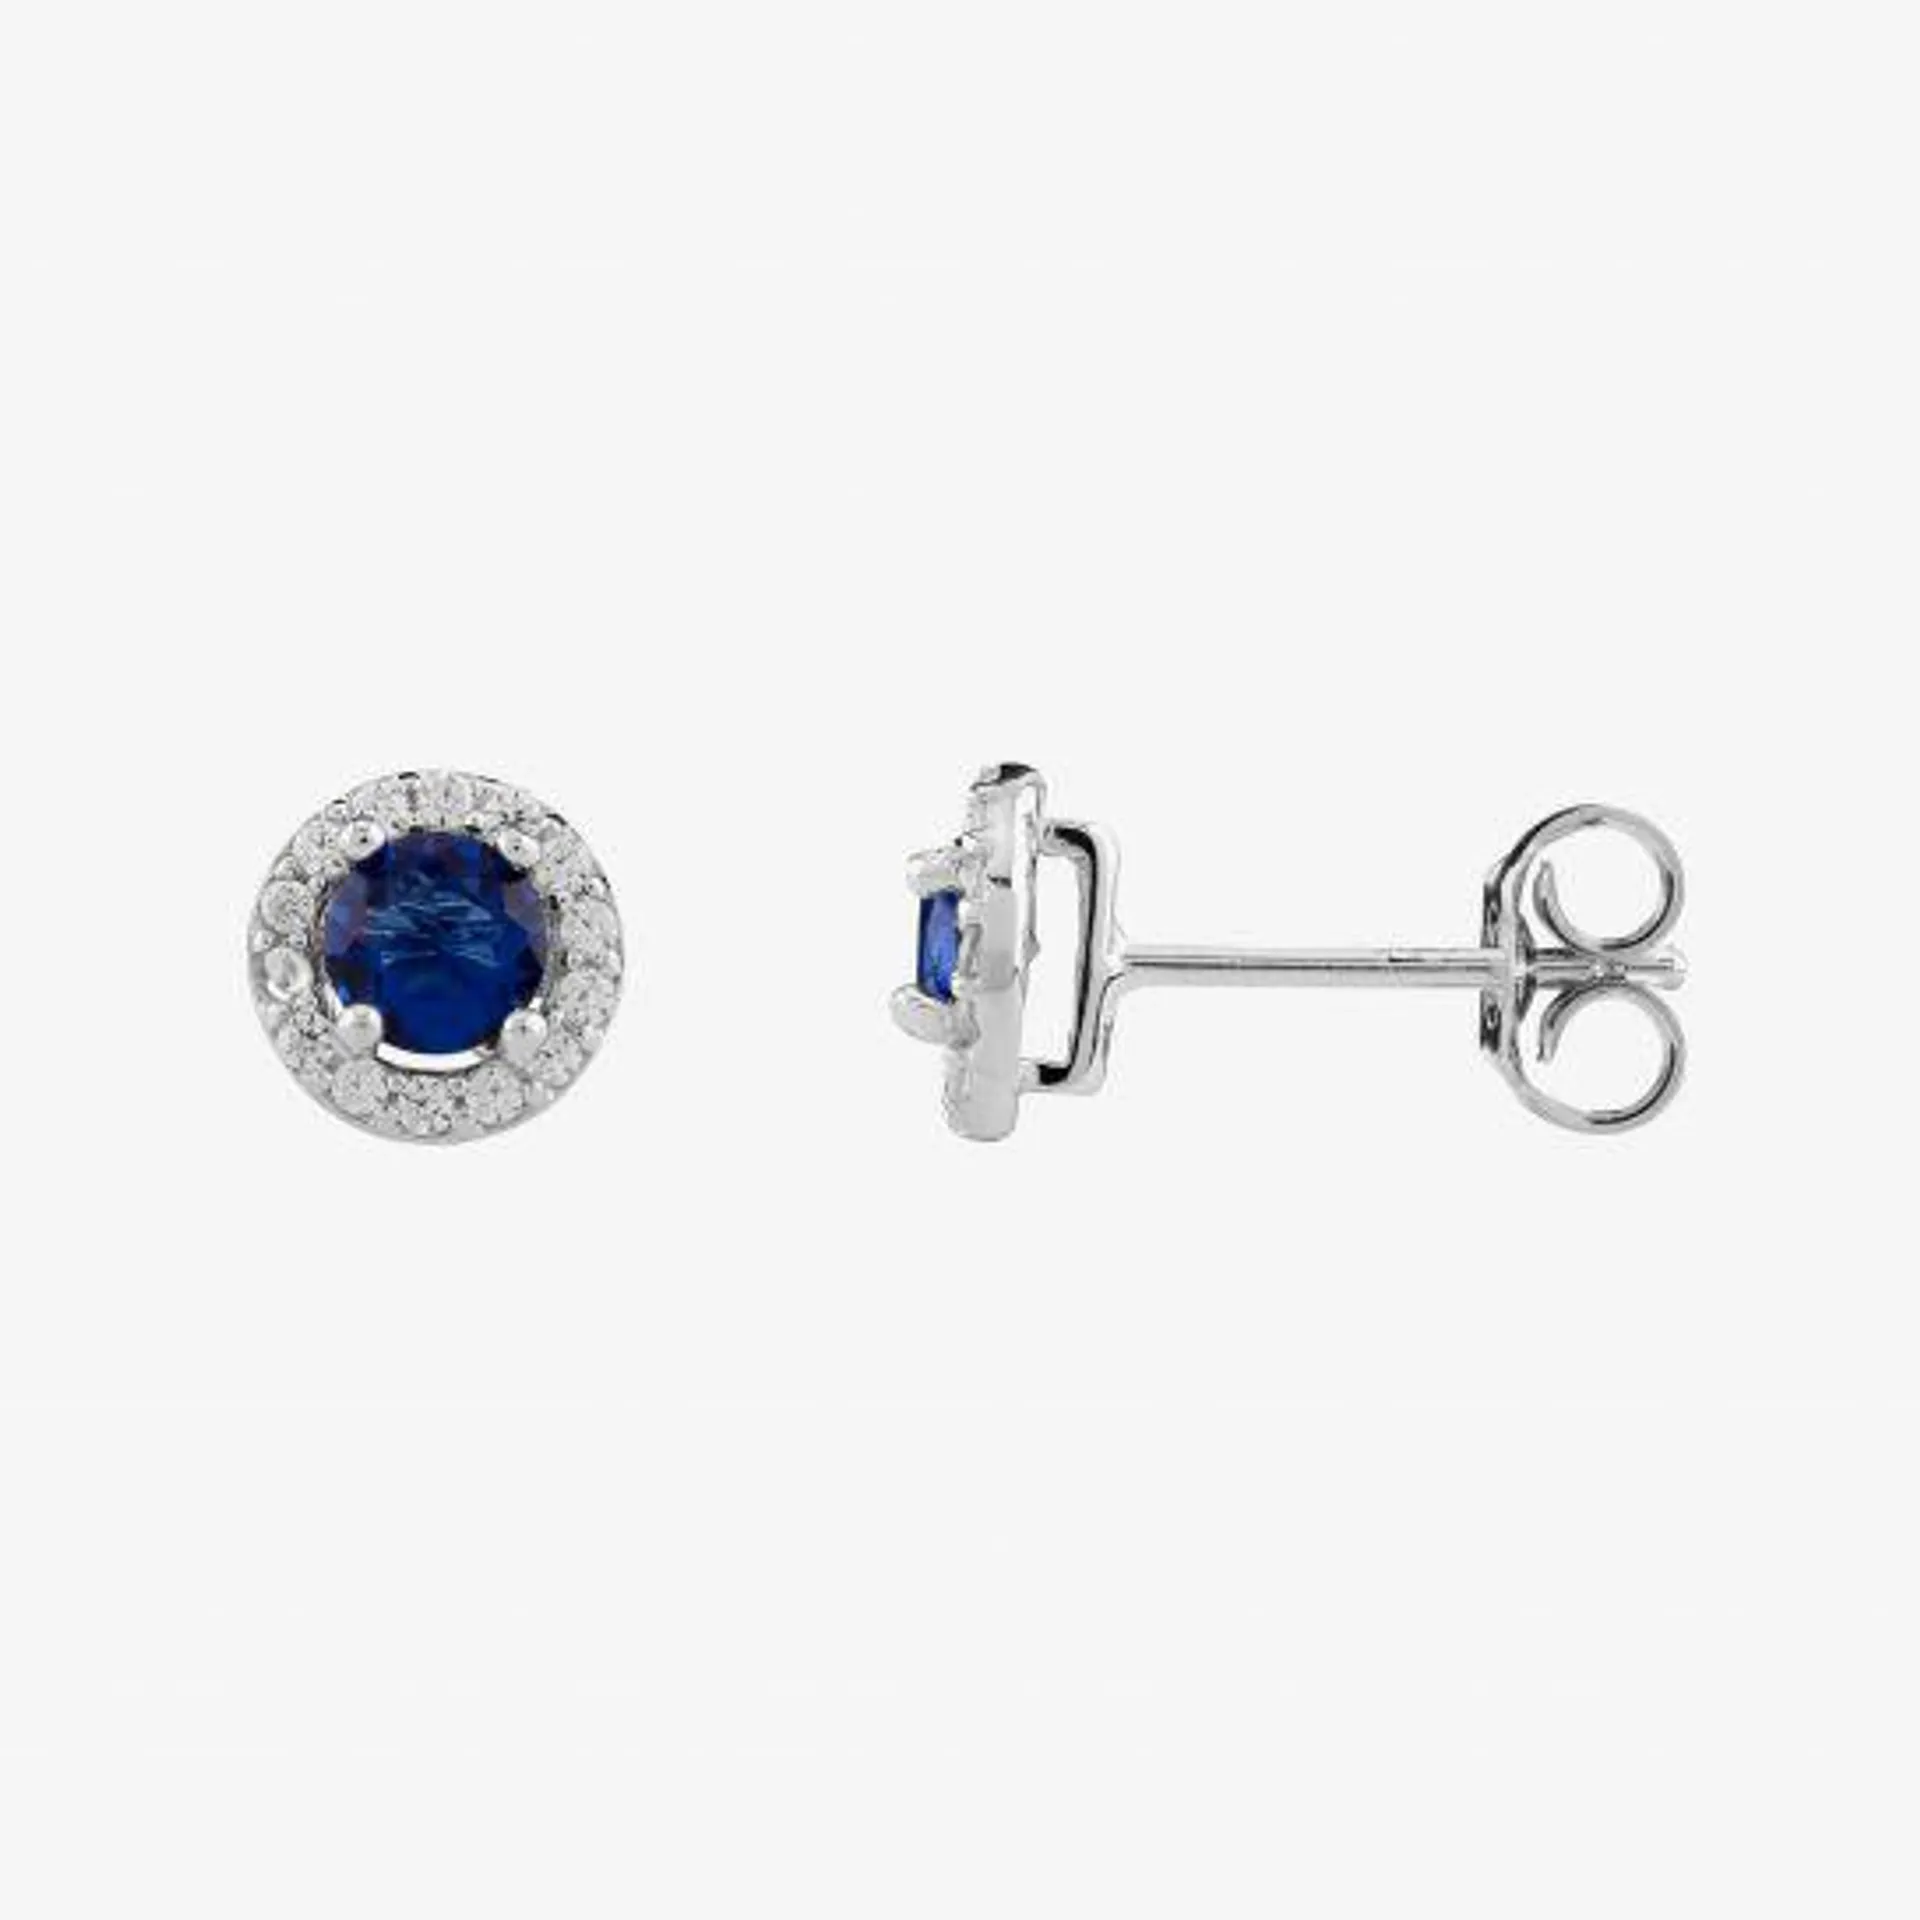 Silver Round Blue Cubic Zirconia Halo Stud Earrings